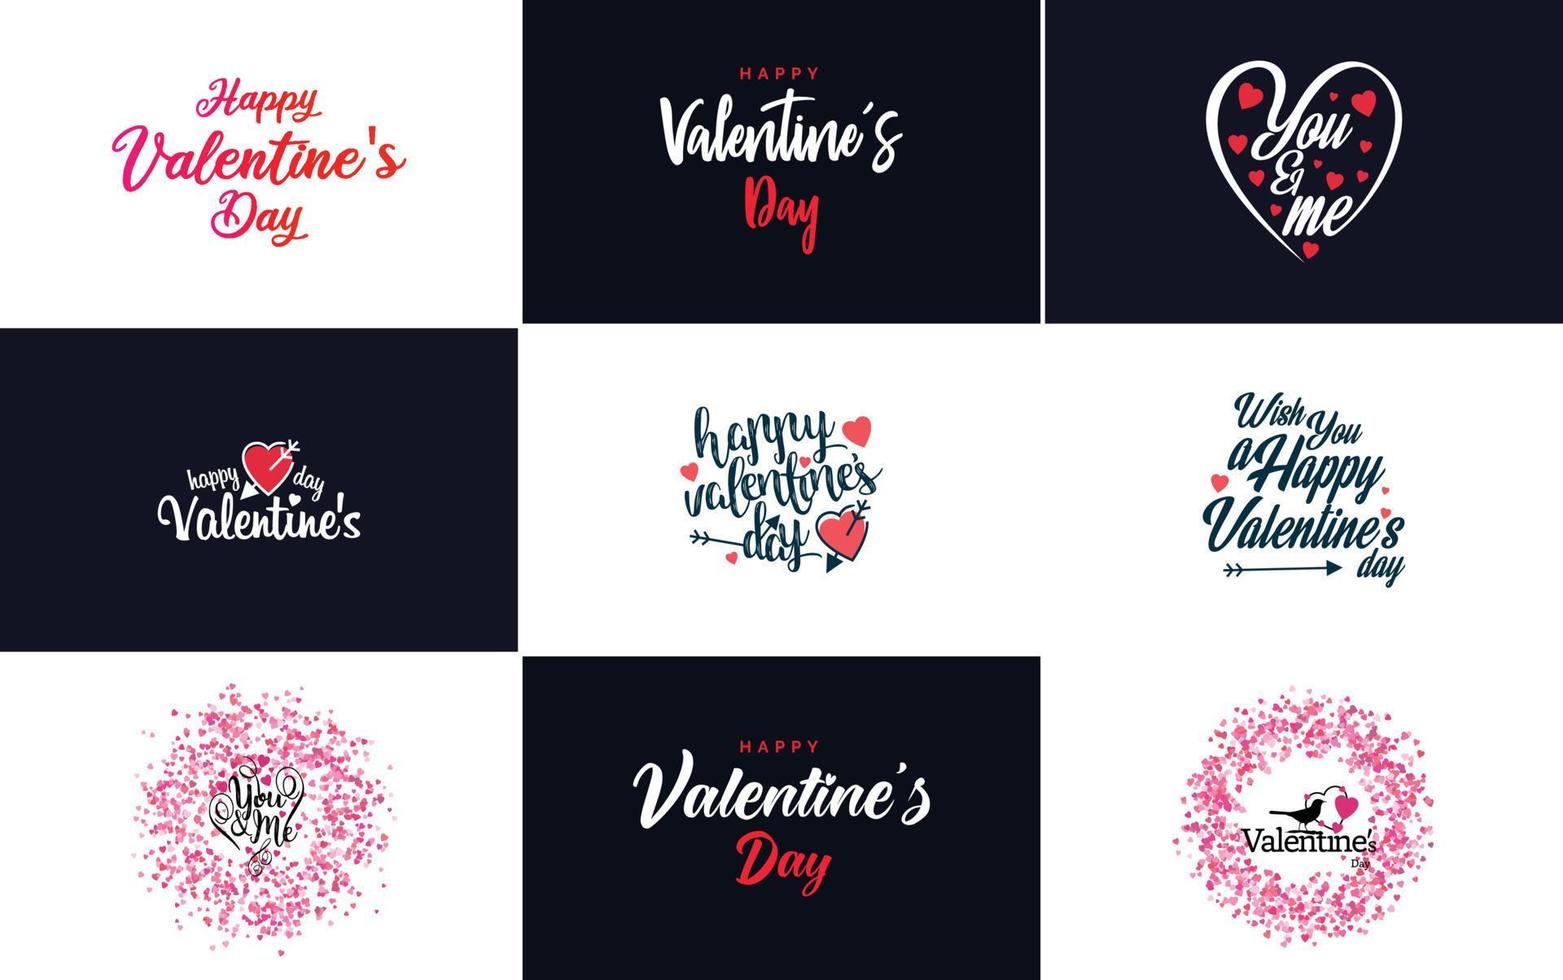 Happy Valentine's Day greeting card template with a romantic theme and a red and pink color scheme vector